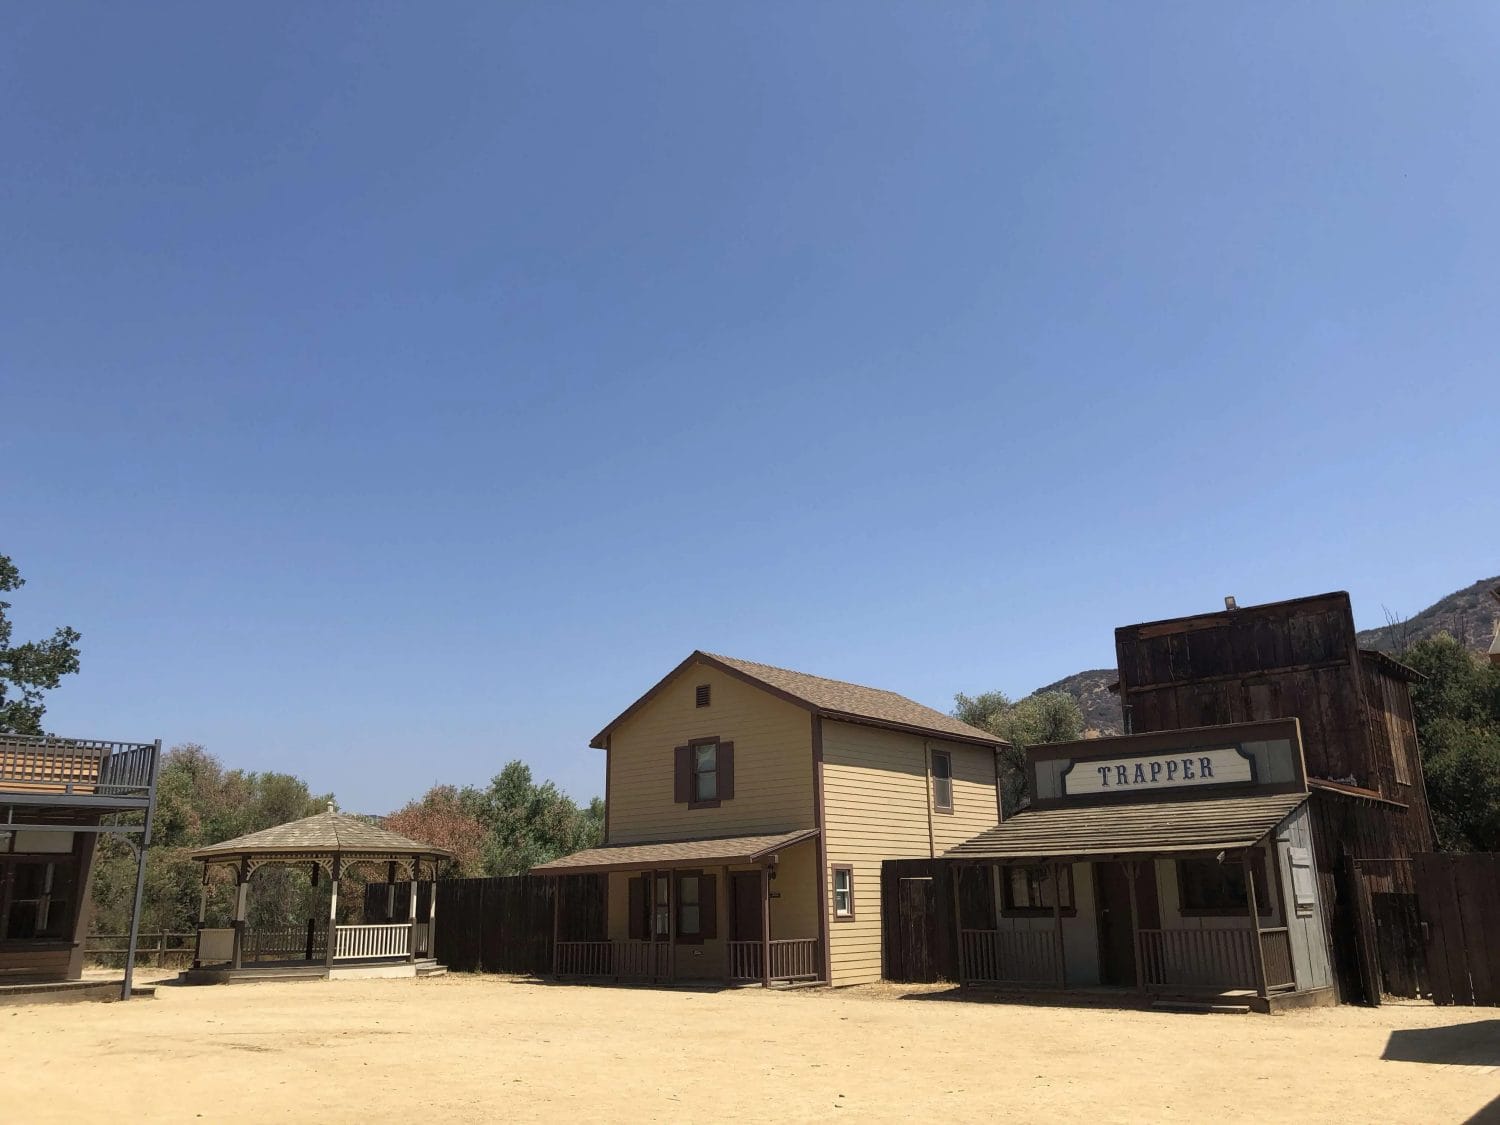 Paramount Ranch - Photo credit: Fantrippers